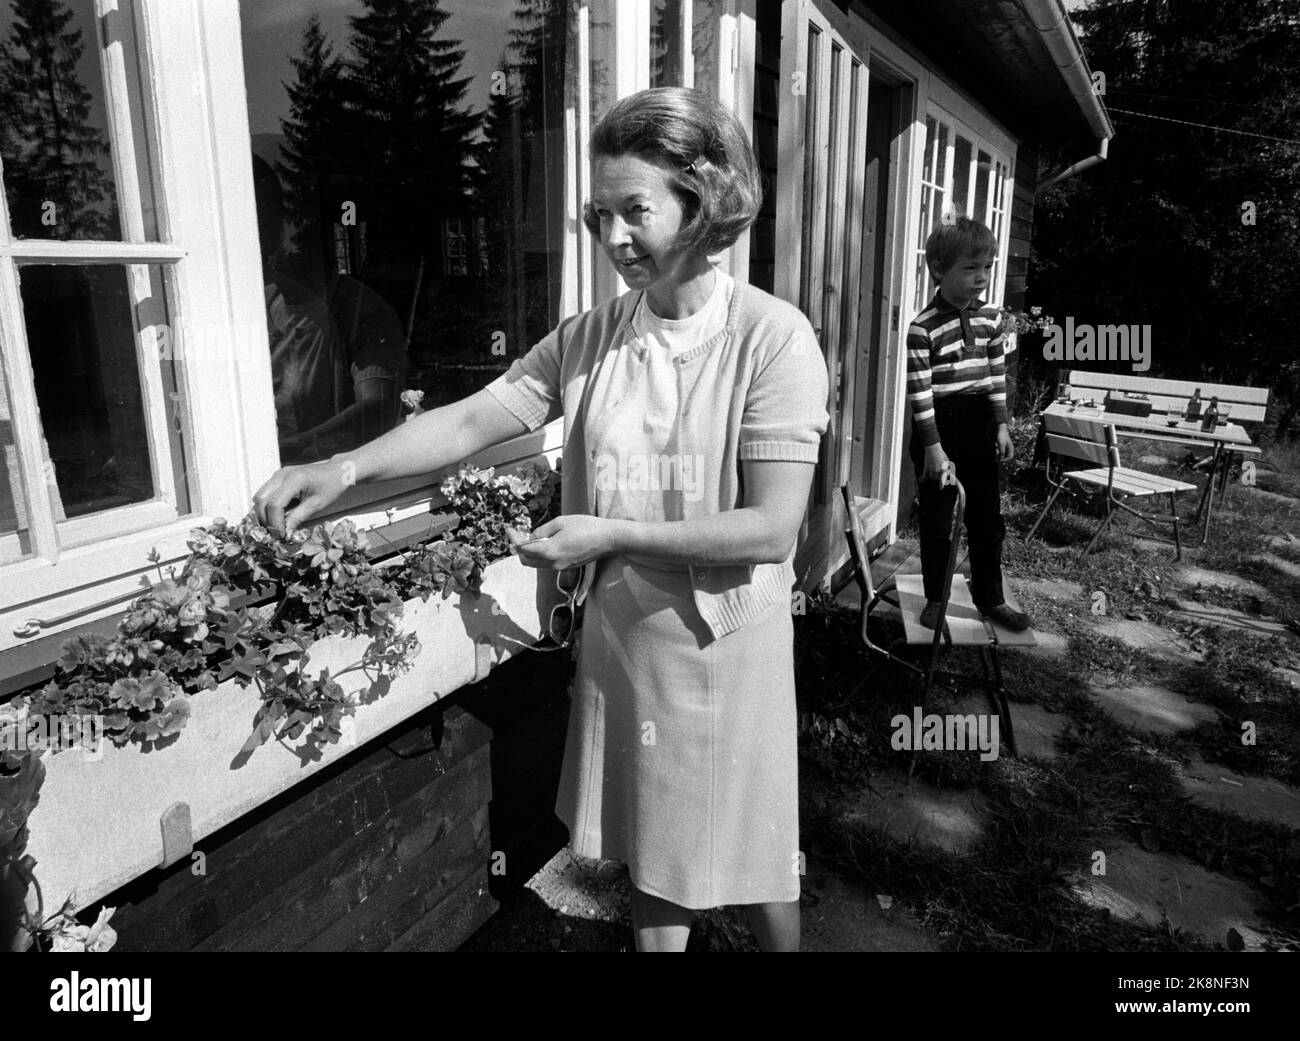 Vangsåsen at Hamar in the summer of 1967. West German Foreign Minister Willy Brandt has bought a cabin in Vangsåsen at Hamar. Here Mrs. Ruth Brandt who puts the flowers in the flower boxes at the cabin. In the background, the youngest son Mathias. Photo: Storløkken / Current / NTB Stock Photo